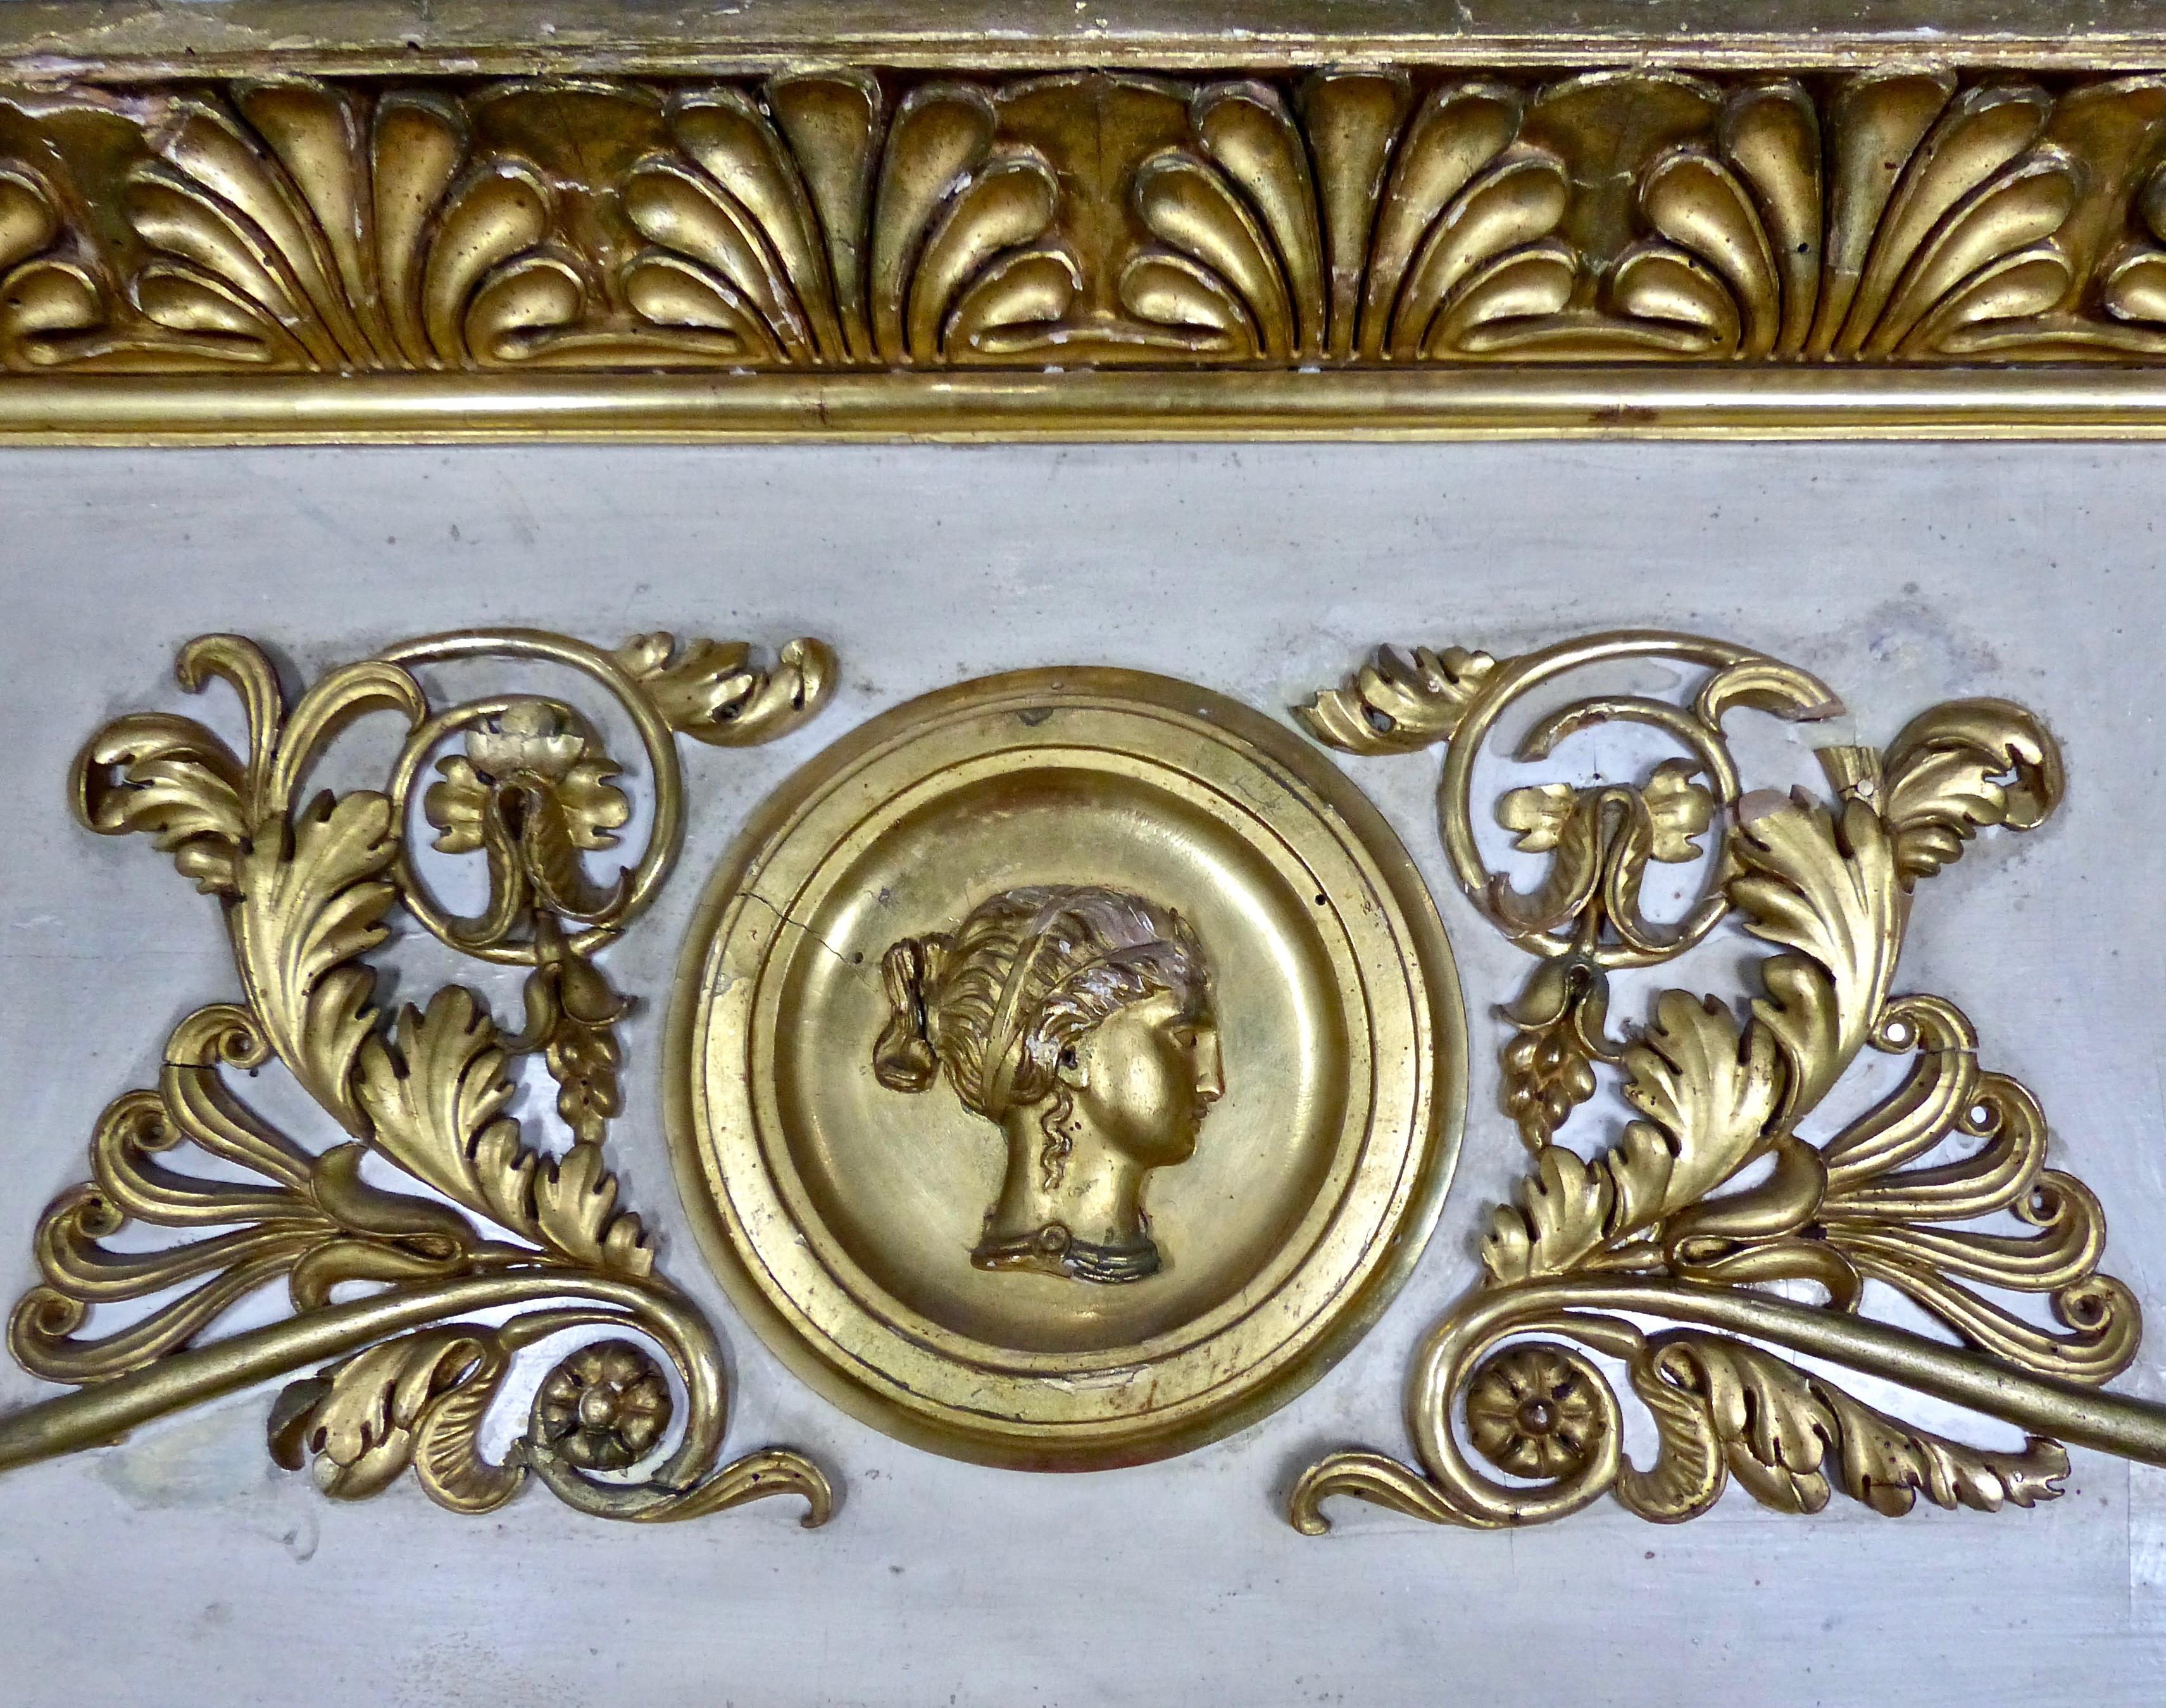 A large and spectacular giltwood Italian trumeau mirror from circa 1880. Cameo-style cartouches as well as other decorative details in beautifully crafted gold leaf. A Classic signature for your home.
Dimensions: 68 H” x 57 W” x 5 D”.